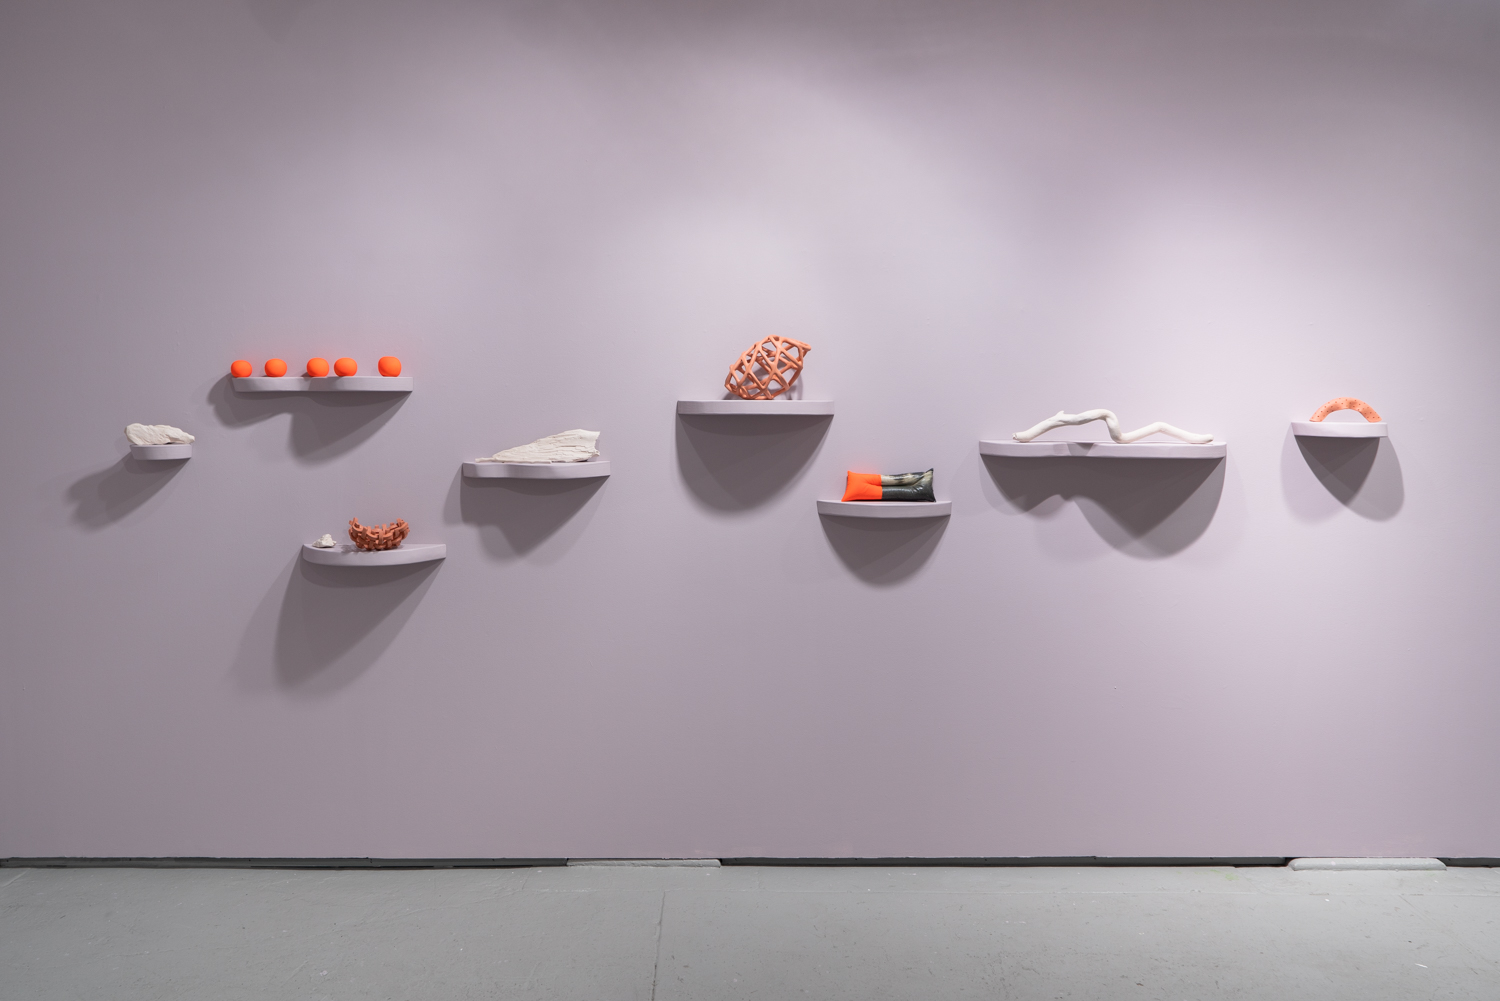  Meghan Grubb,  river-bodies,  2019, shelves, various handmade objects, dimensions variable 